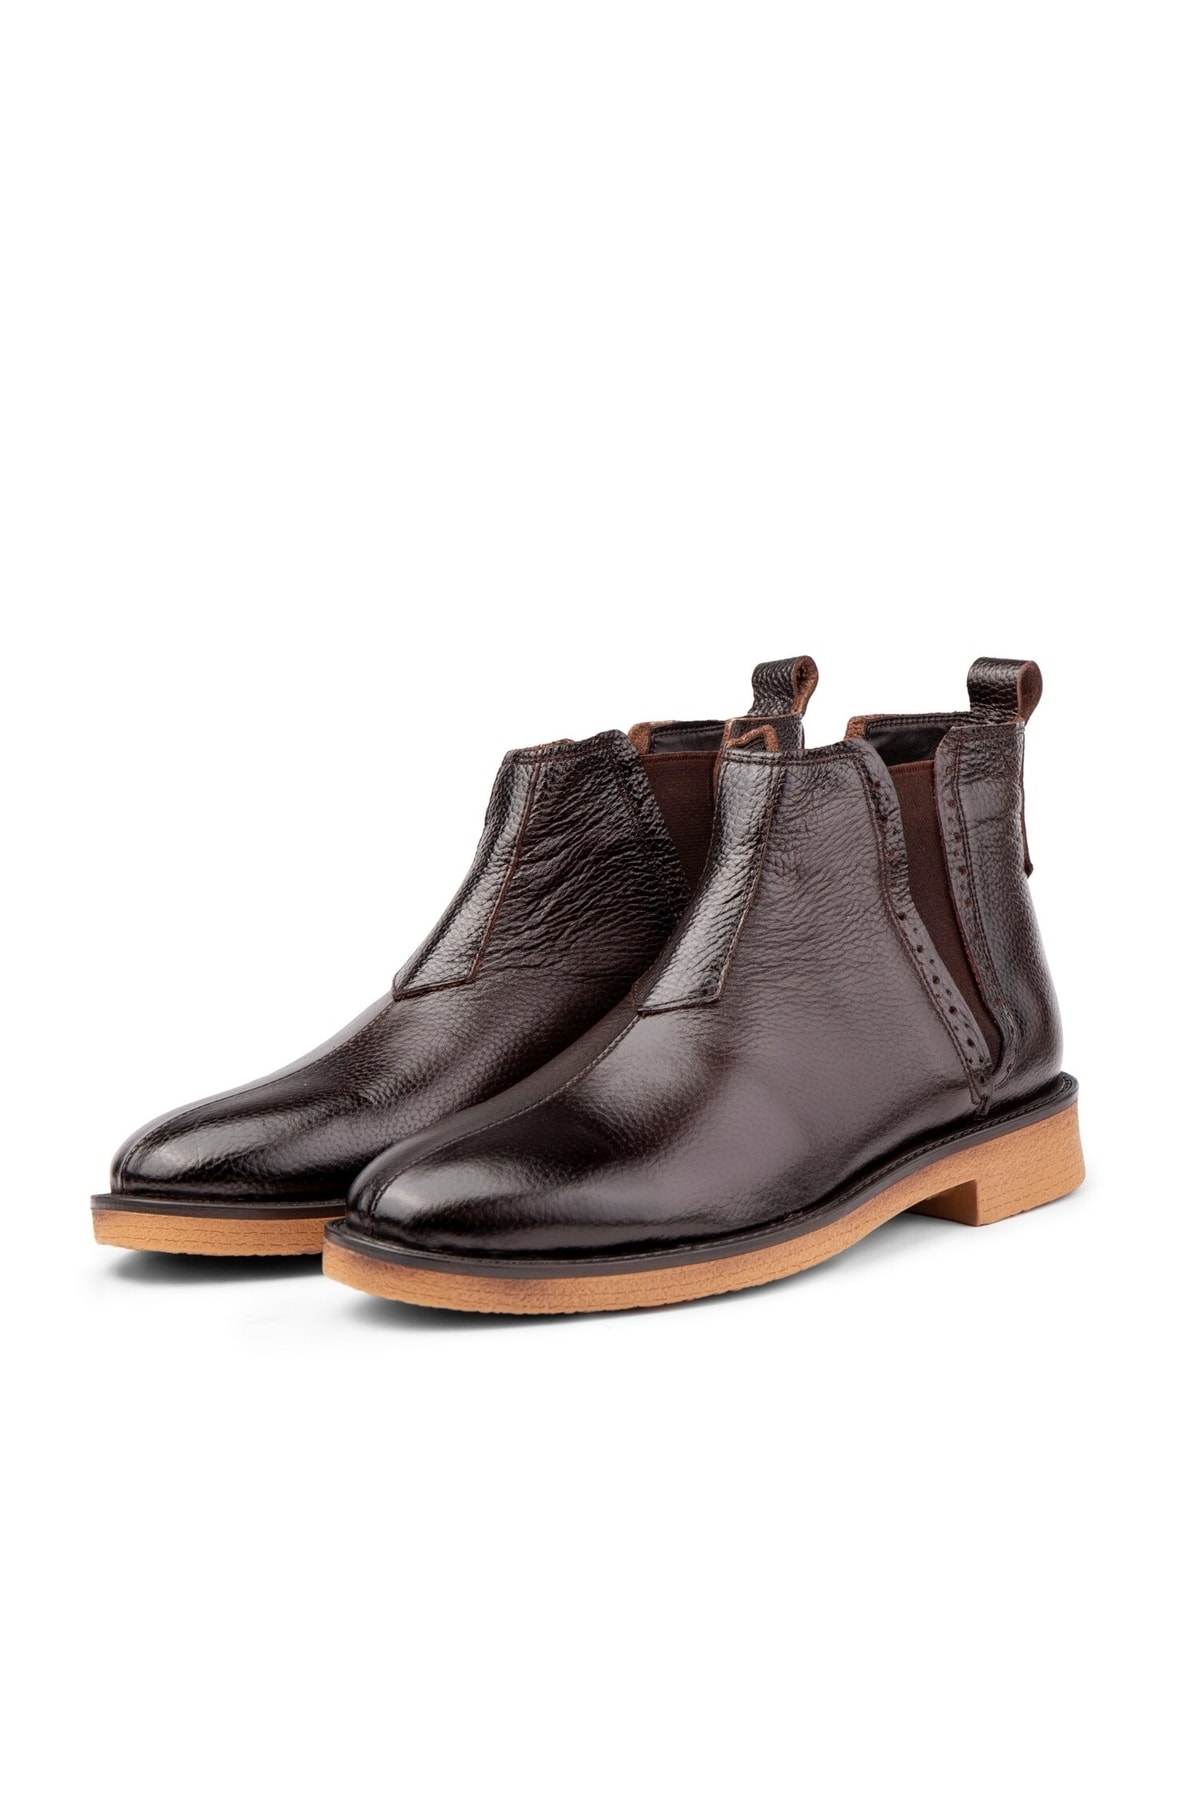 Levně Ducavelli Leeds Genuine Leather Chelsea Daily Boots With Non-Slip Soles Brown.